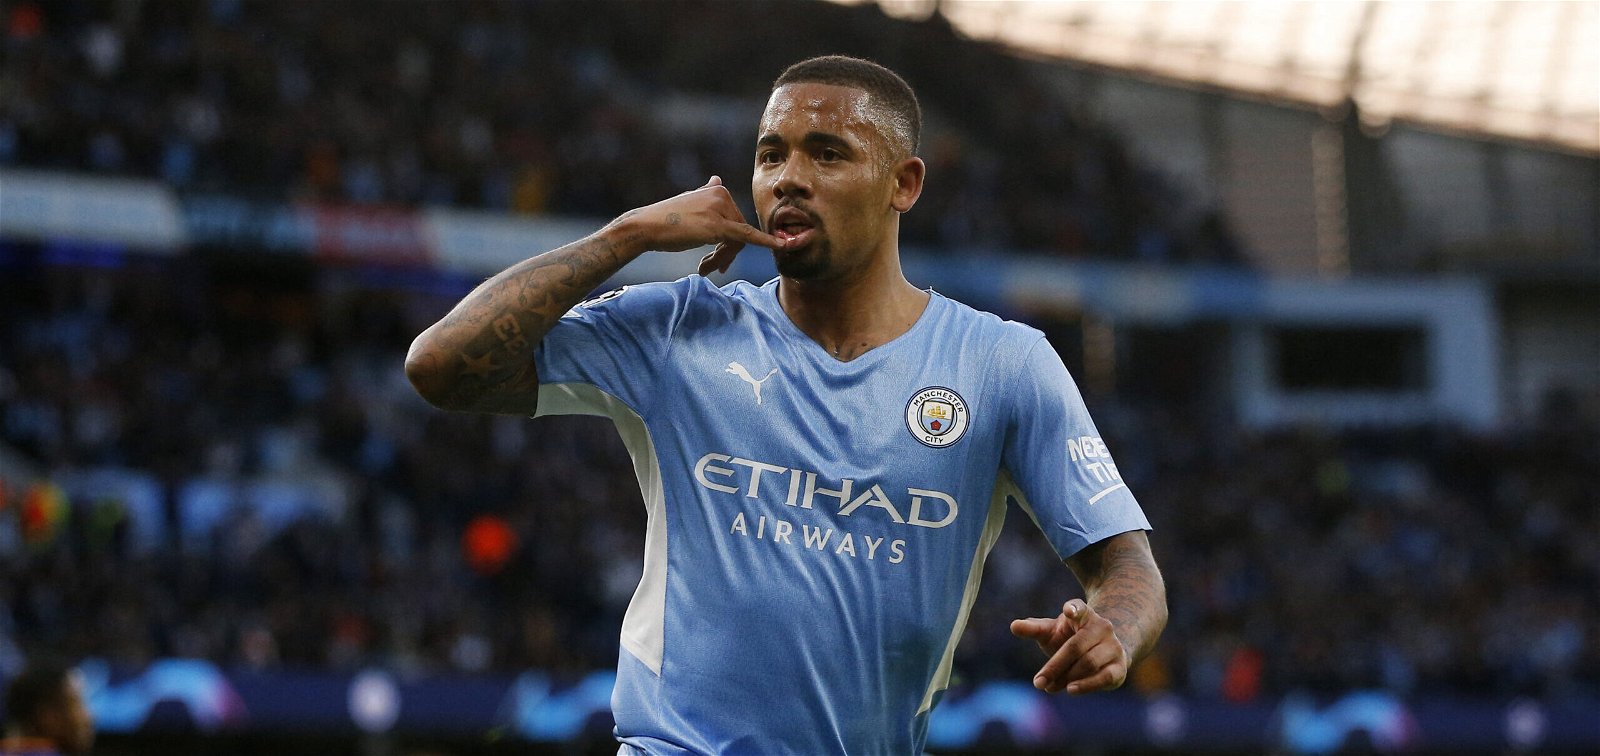 Gabriel-Jesus-celebrates-scoring-for-Manchester-City-in-the-UEFA-Champions-League-semi-final-first-leg-tie-with-Real-Madrid